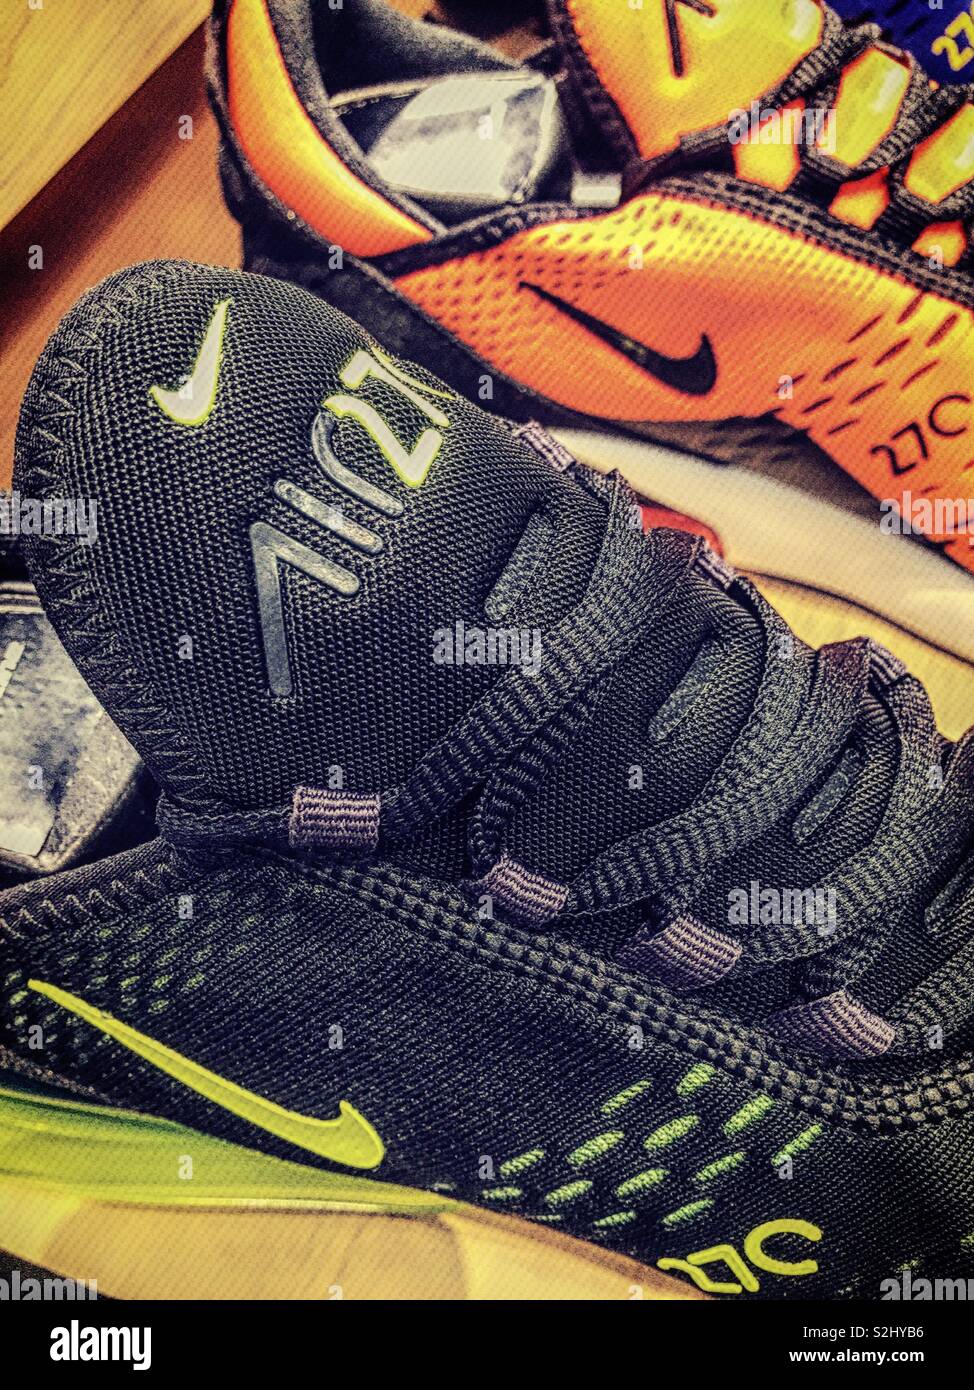 intermitente Preceder recuperar Close up of athletic shoes with the swoosh logo at the Nike store, NYC, USA  Stock Photo - Alamy